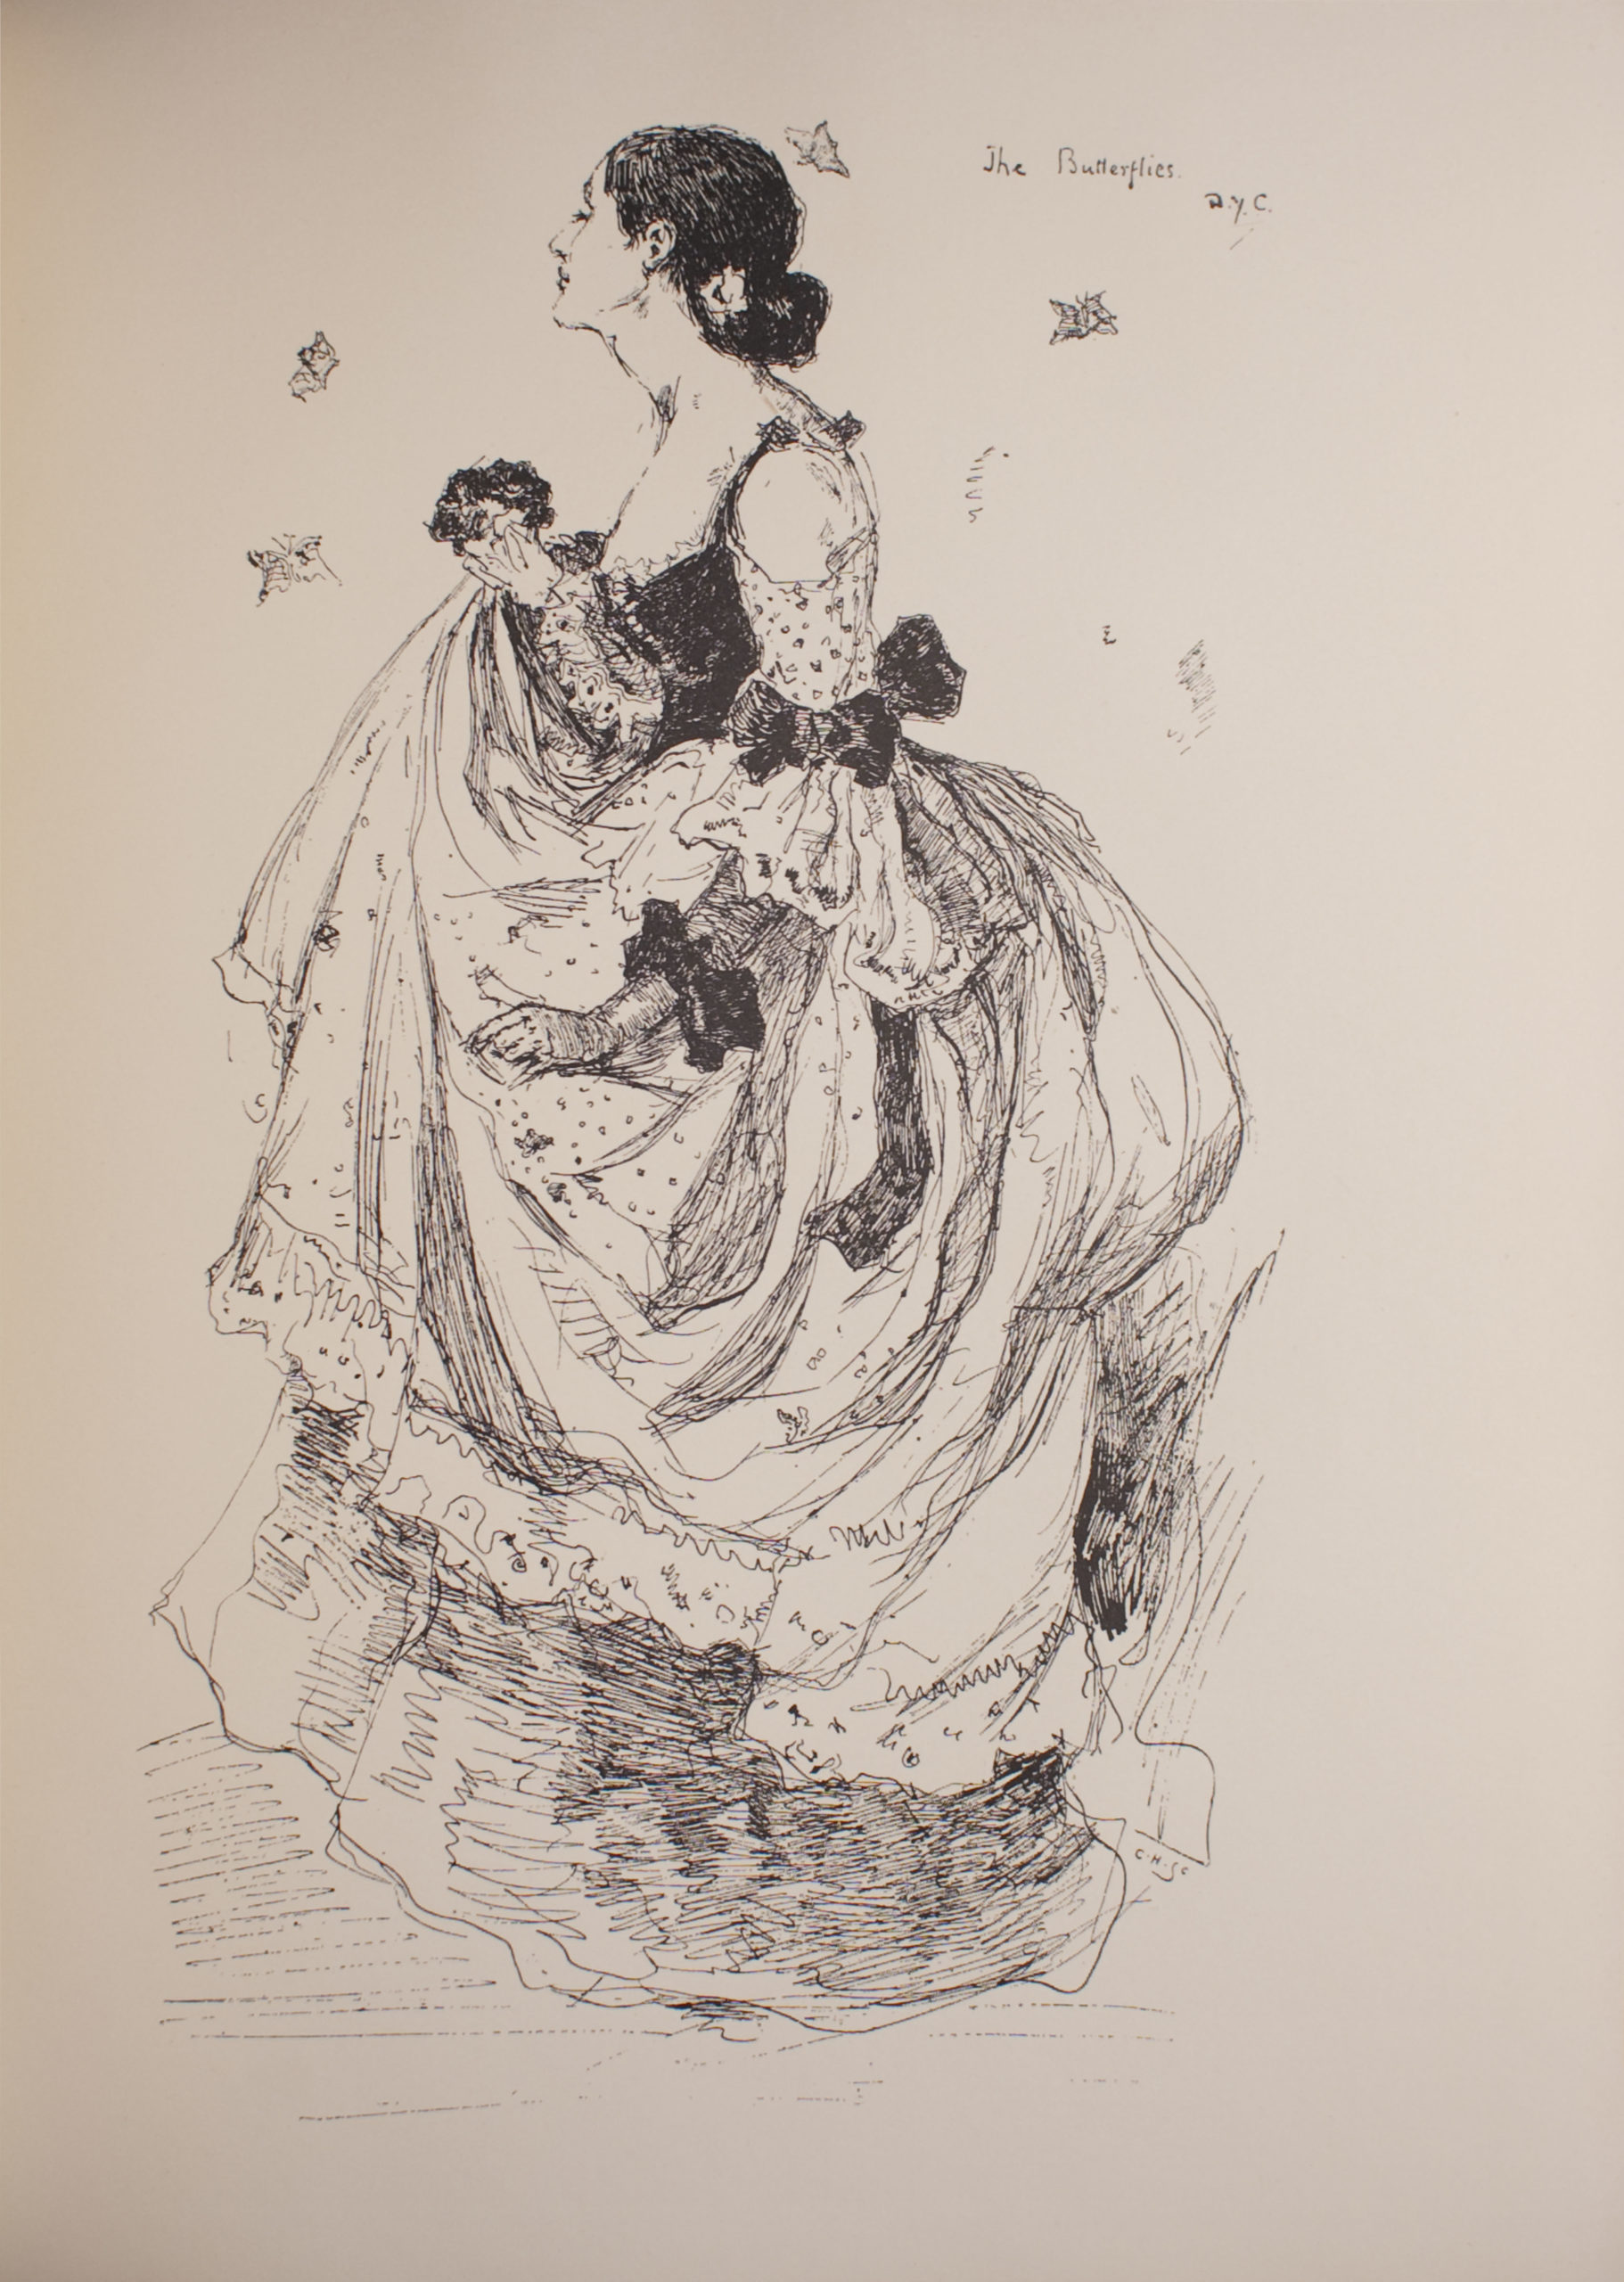 Image is of a woman in full profile She is facing the left with her eyes closed Her dark hair is secured in a bun at the nape of her neck by a piece of jewellery or flower Her dress is full with patterned ¾ off the shoulder sleeves There are dark bows at the woman’s elbow and wrist and at the back of her skirt The neckline of the dress is low and ruffled The woman is holding her skirt and a bouquet in her right hand There are four butterflies flying around the woman The image title and artist signature are in the upper right hand corner the engraver’s name is in the lower right hand corner beneath the woman’s hemline The image is open and undefined The image is vertically displayed